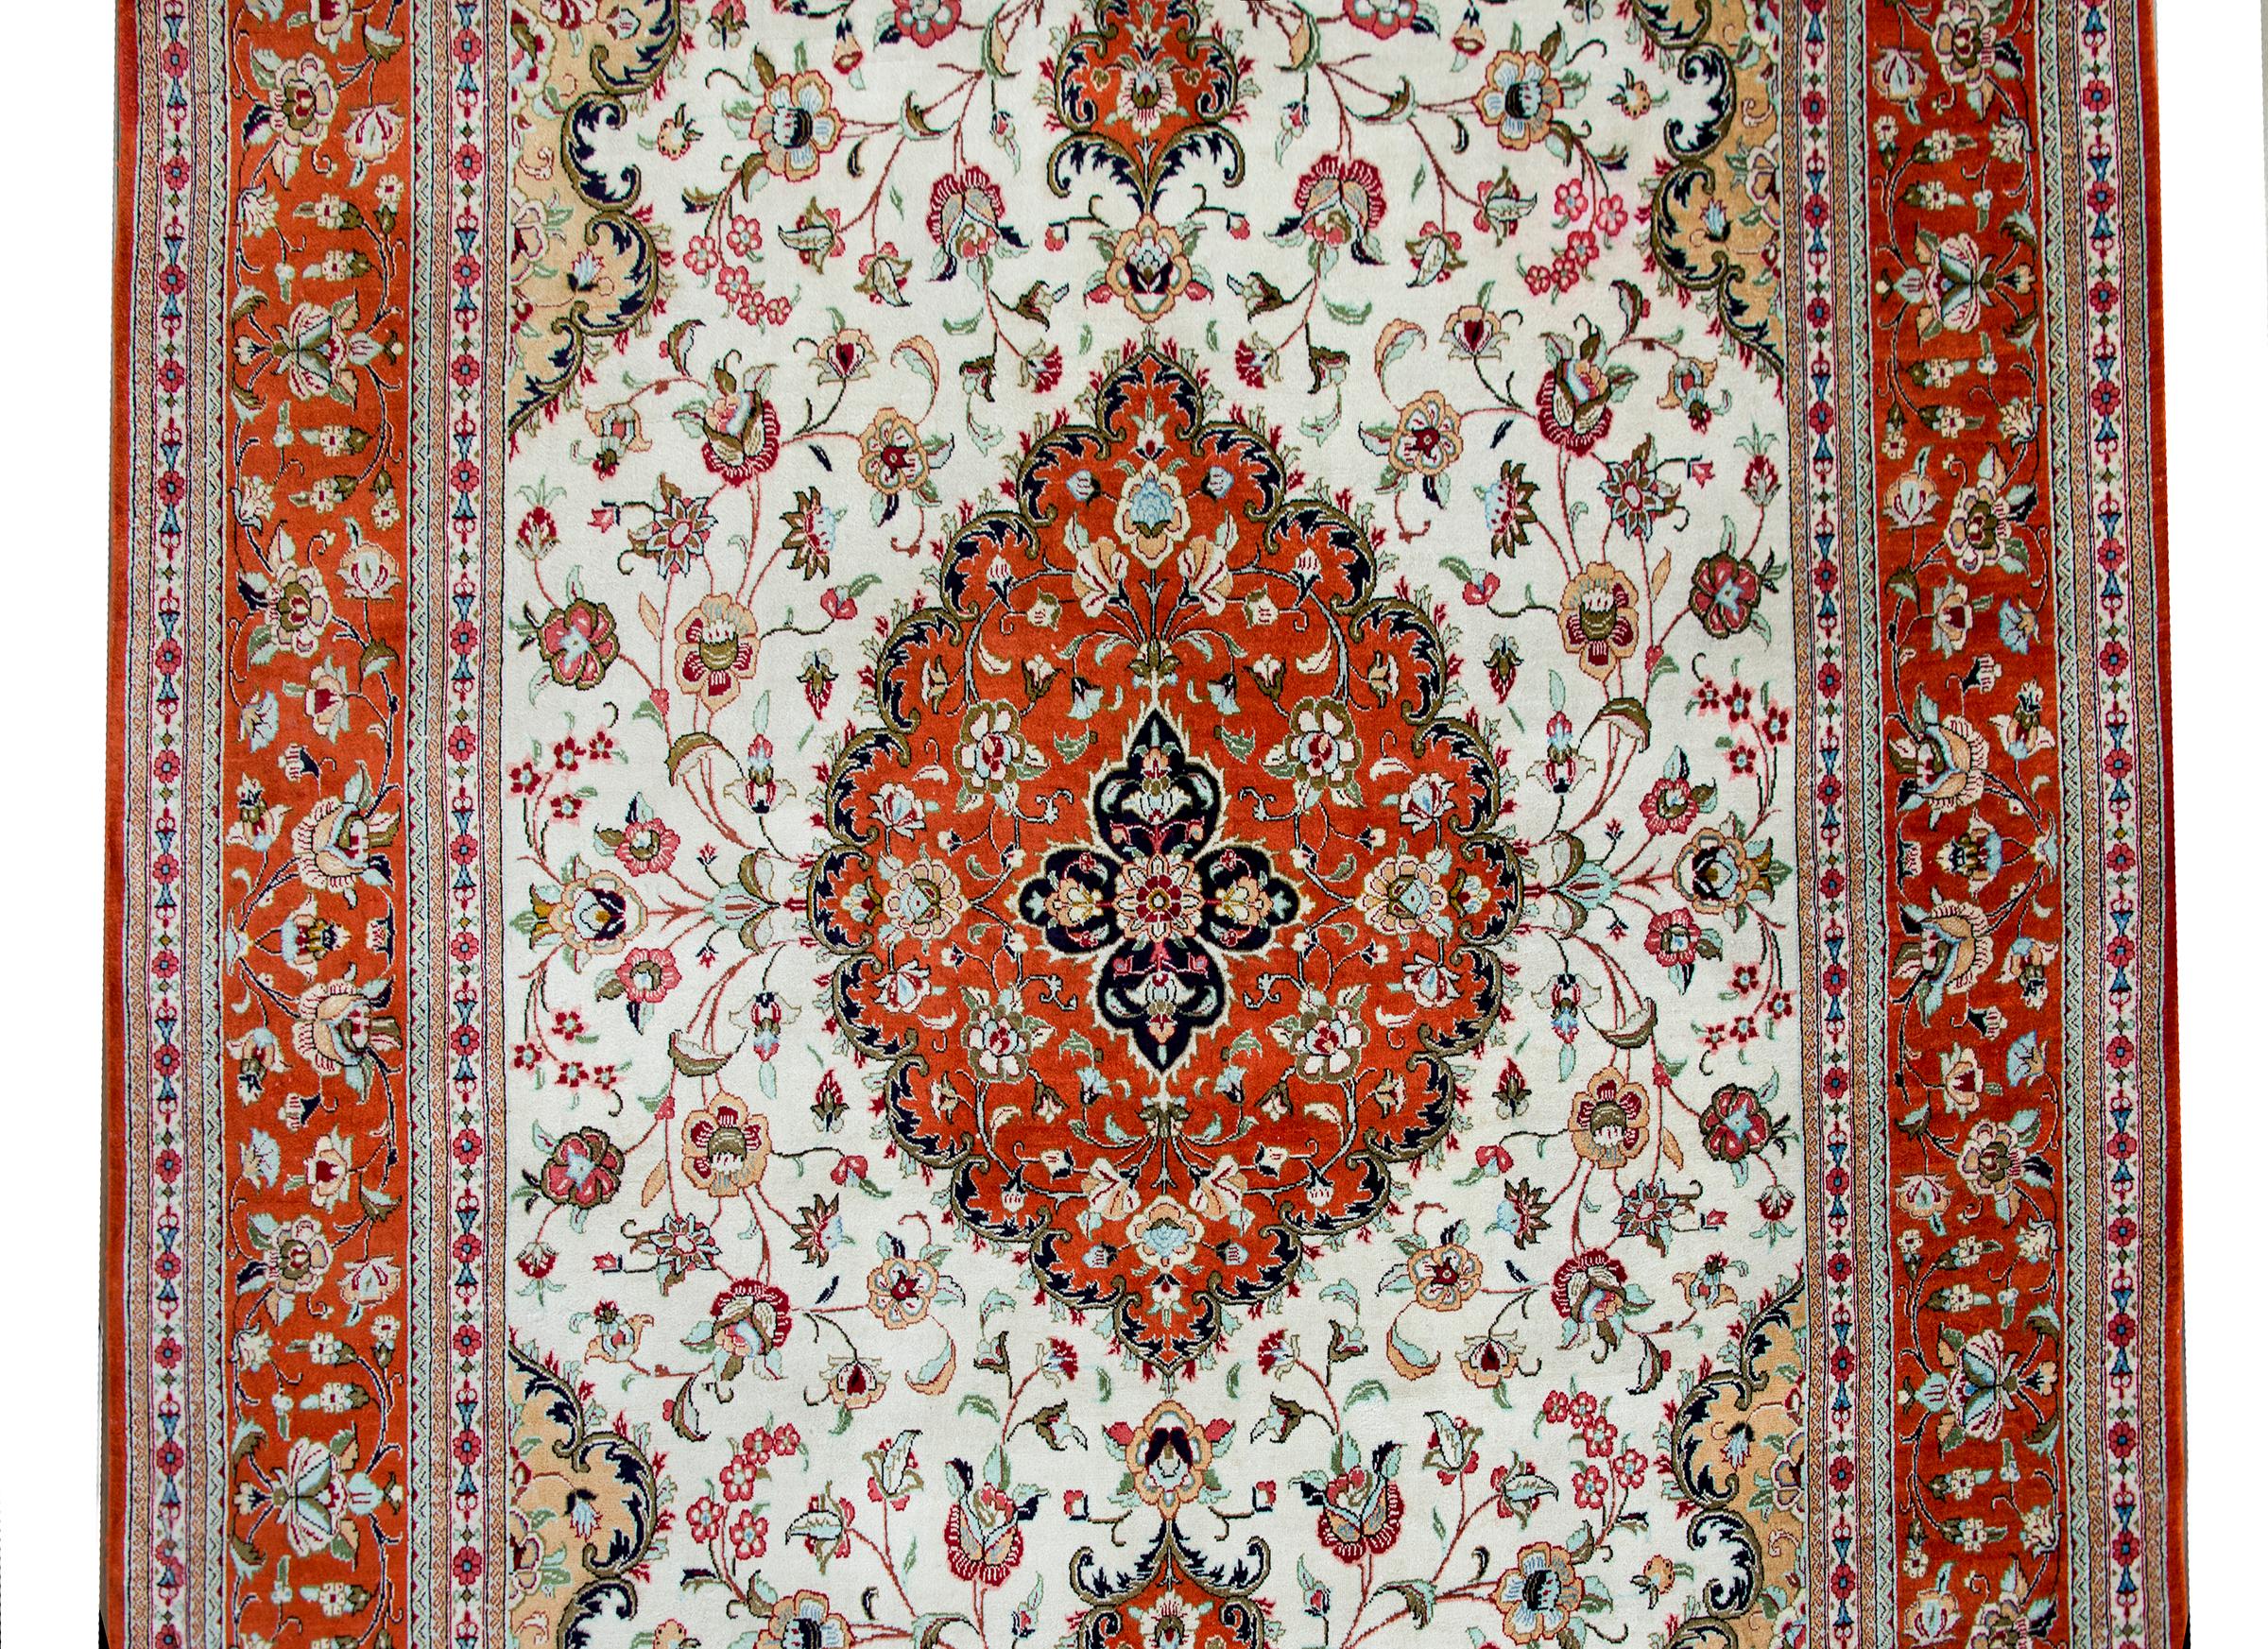 A stunning late 20th century Persian Qum 100% silk rug with a large central floral medallion floating amidst a field of more stylized flowers and scrolling vines, and surrounded by a wide border with more repeated flowers and vines, and all woven in